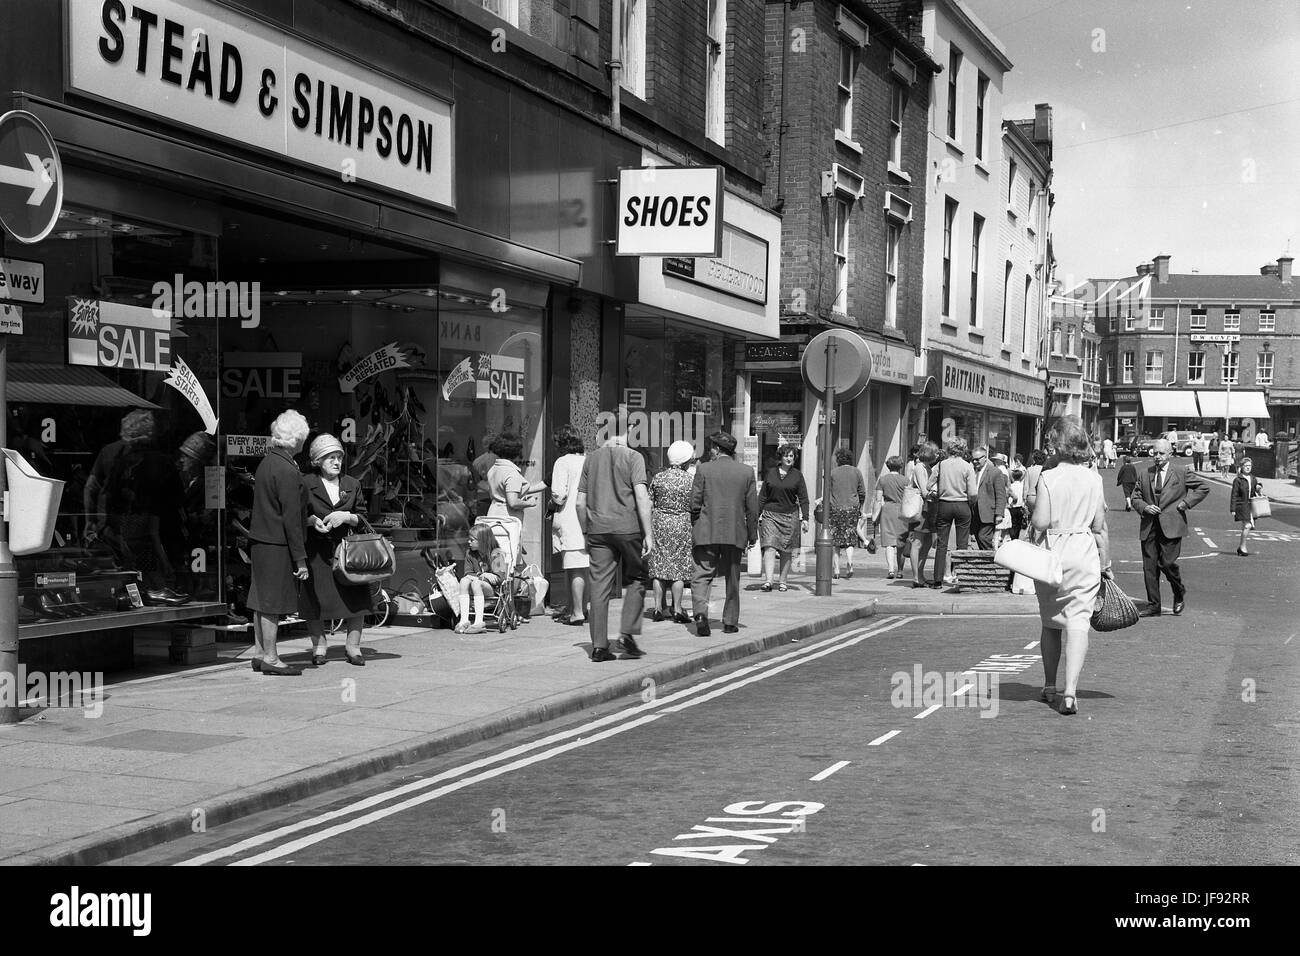 Busy provincial market town Wellington Shropshire 1960s Picture by David Bagnall Stock Photo